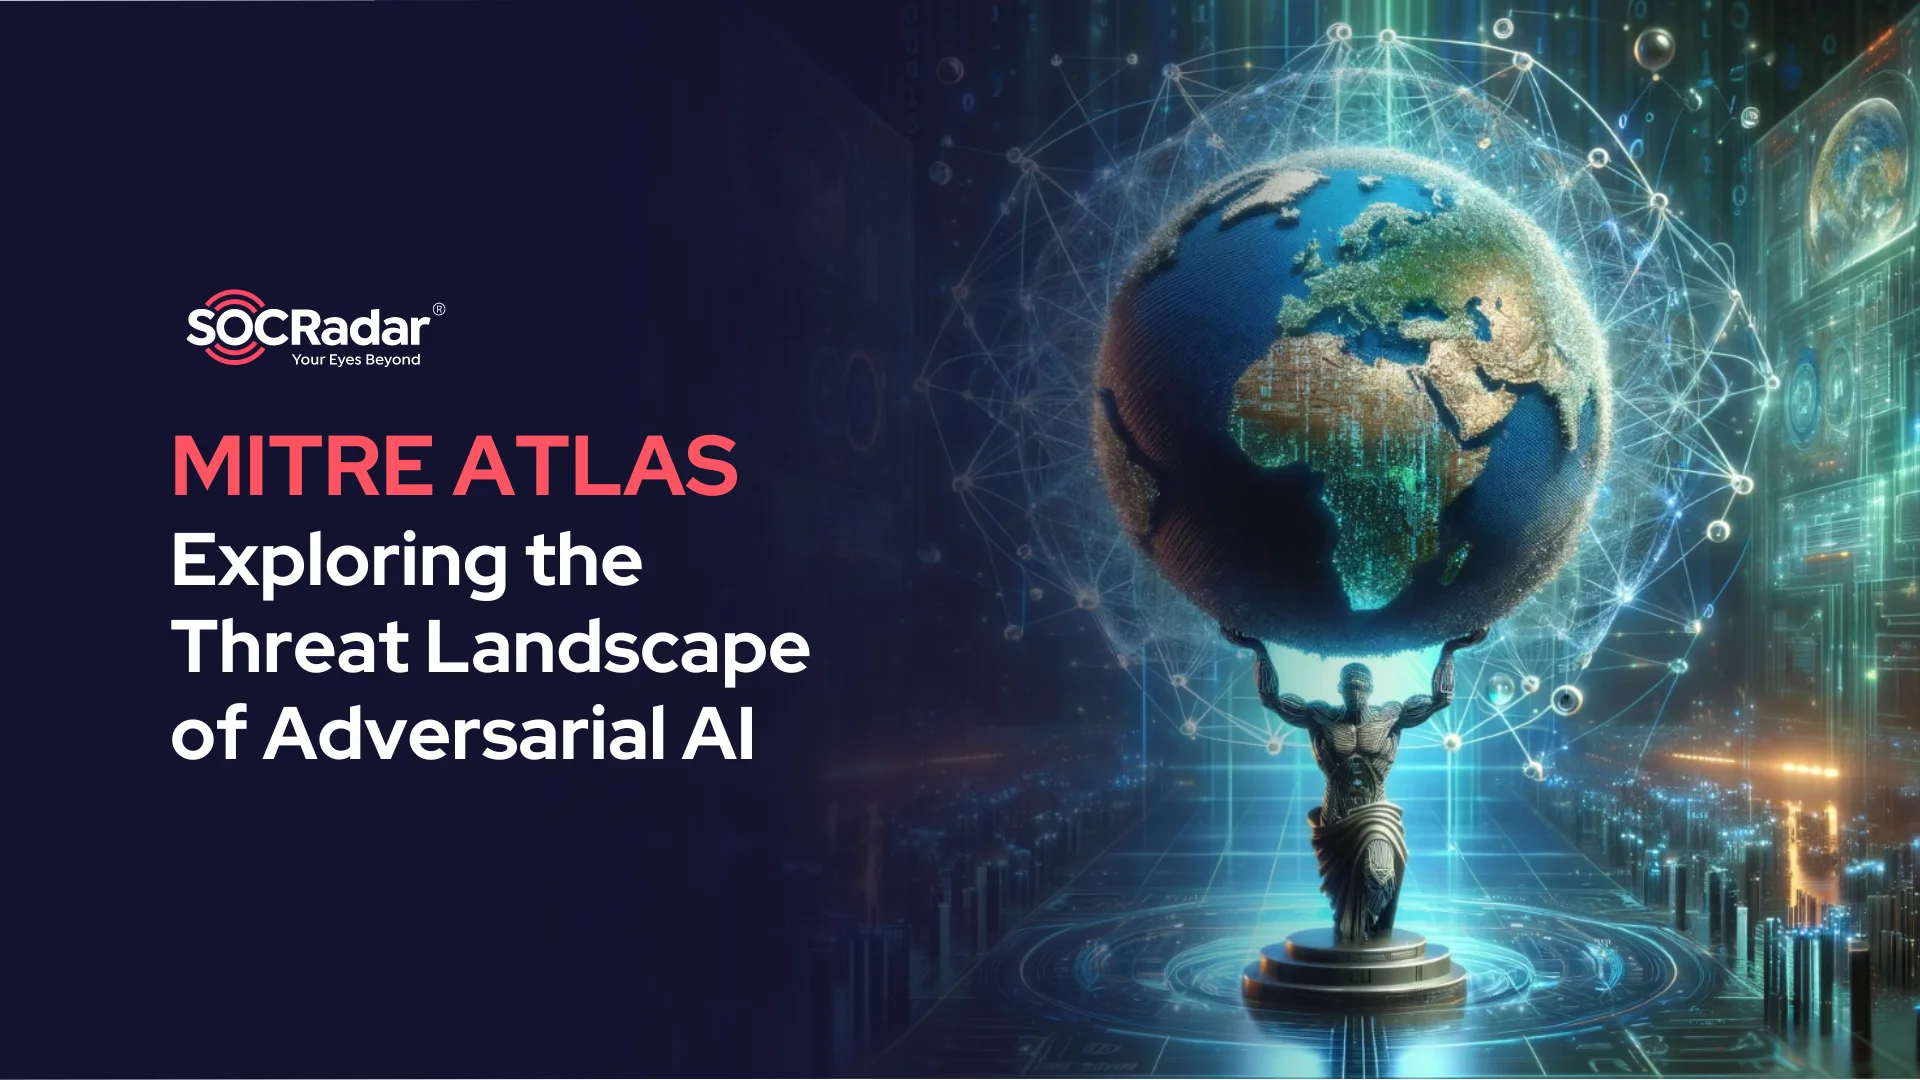 SOCRadar® Cyber Intelligence Inc. | Exploring the Threat Landscape of Adversarial AI with MITRE ATLAS